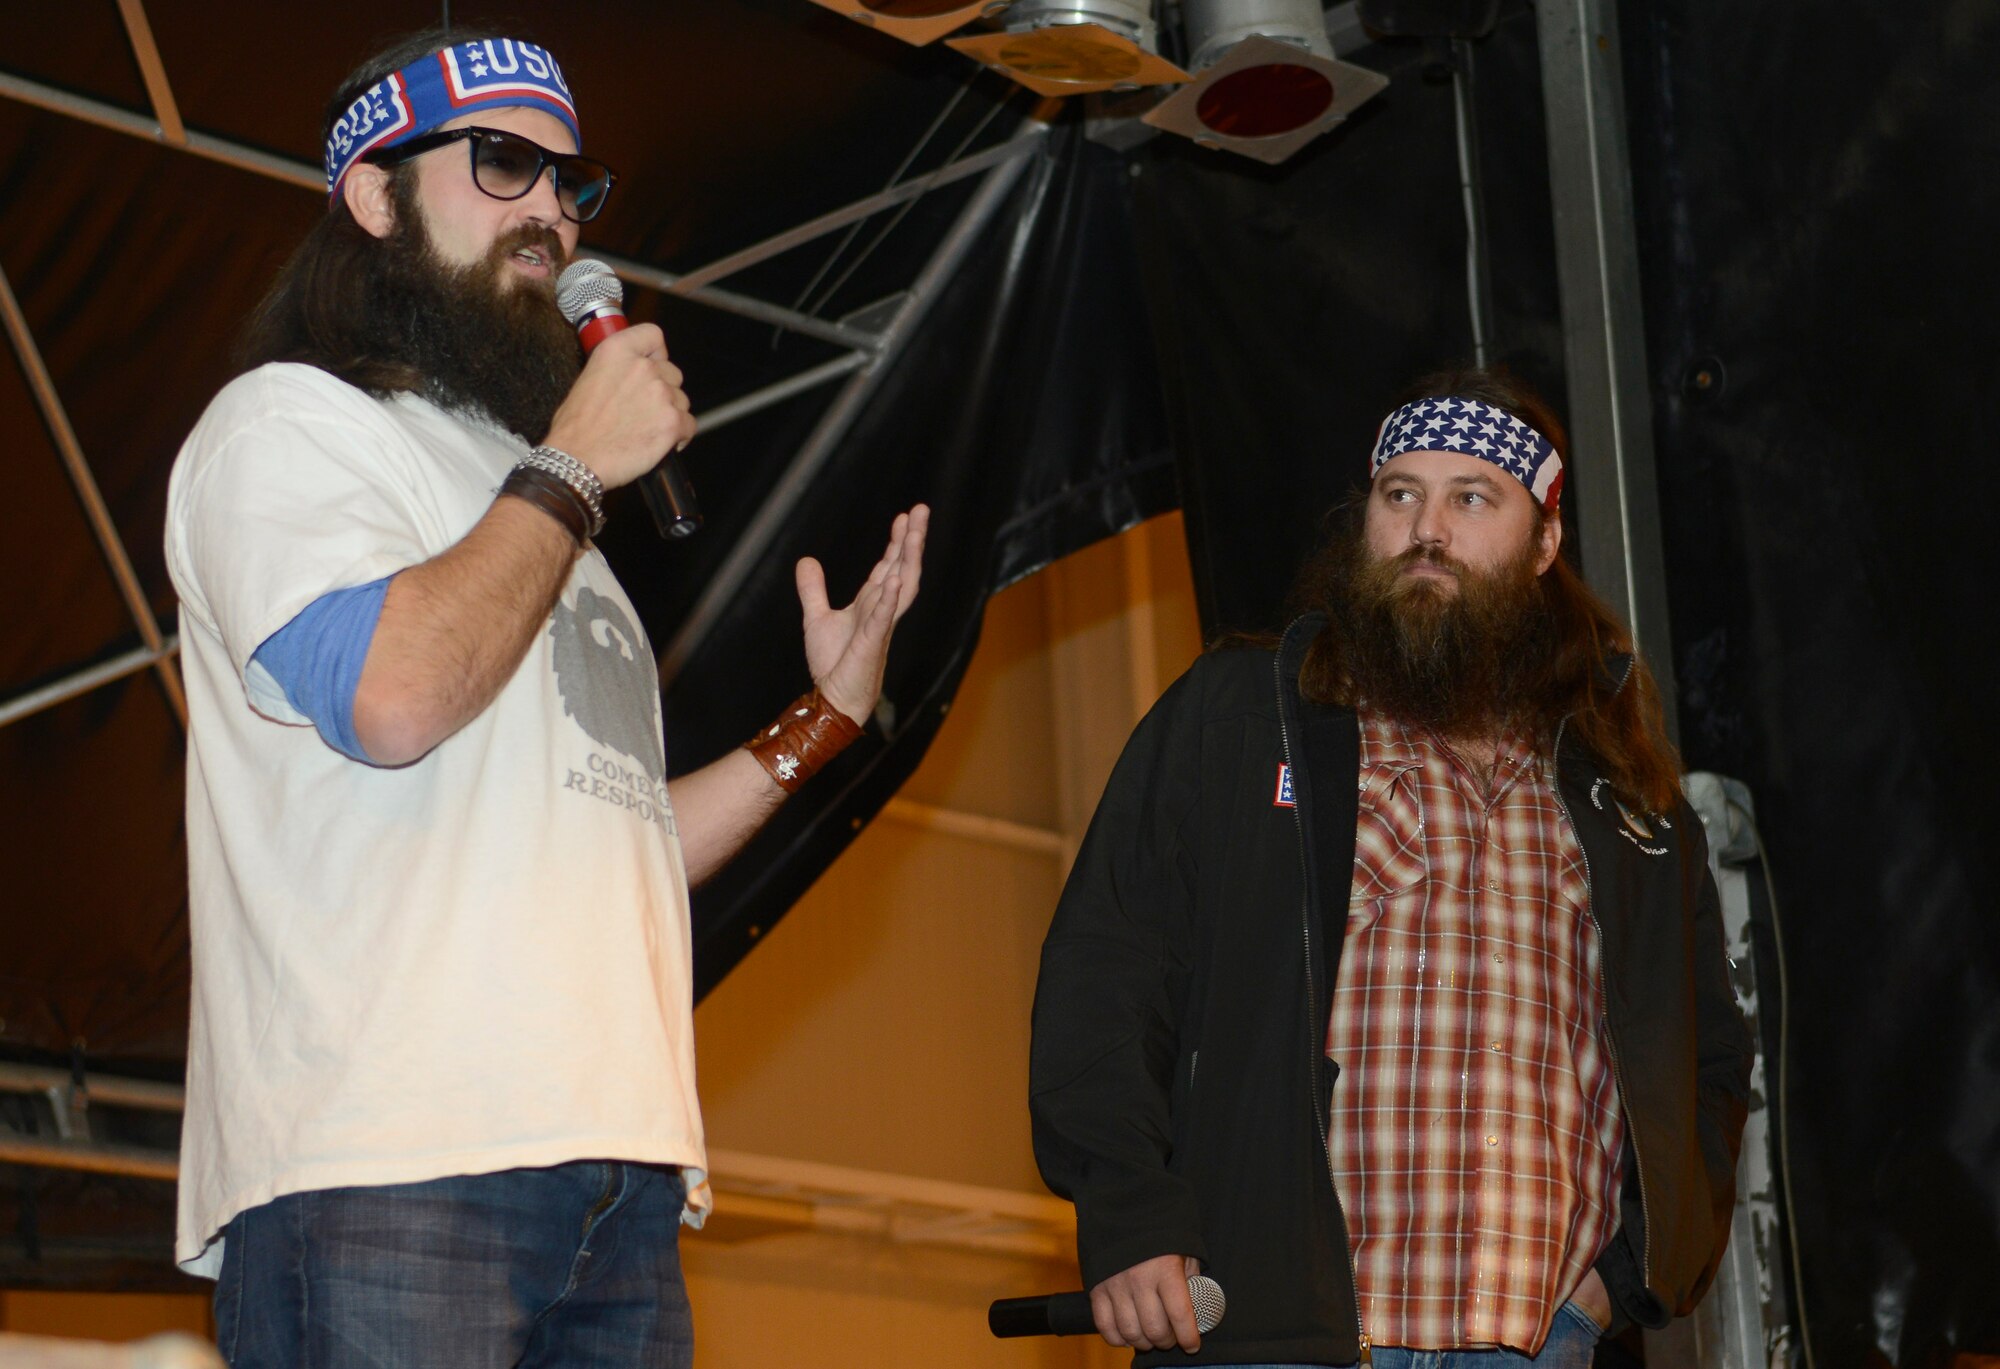 Jep and Willie Robertson, “Duck Dynasty” reality TV personalities, entertain audience members during the United Services Organization’s Annual Chairman’s Holiday Tour, Dec. 11, 2013, at Aviano Air Base, Italy.  The USO was built on the values of support and lifting the spirits of America’s troops by sending entertainment to different military bases around the world. (U.S. Air Force photo/ Airman 1st Class Deana Heitzman)